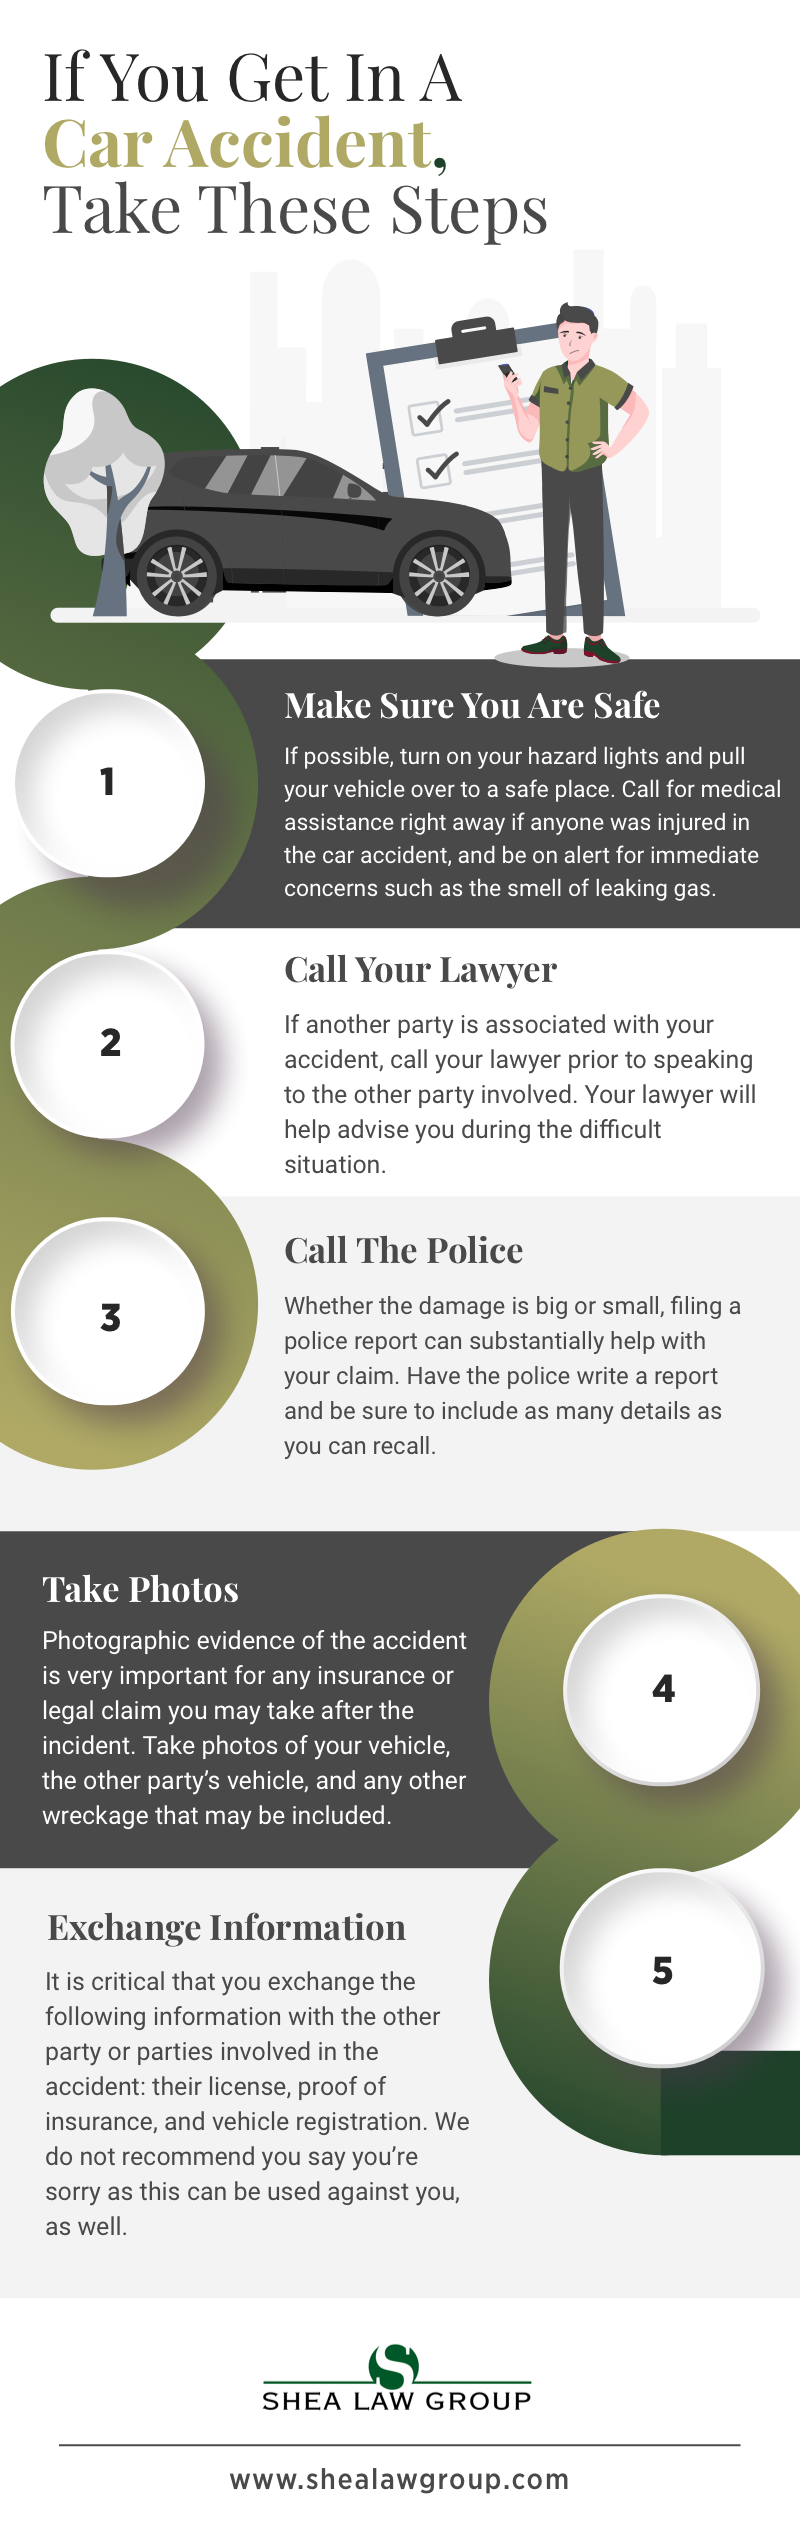 Shea Law Group infographic showing step by step what to do if you are involved in a vehicle accident